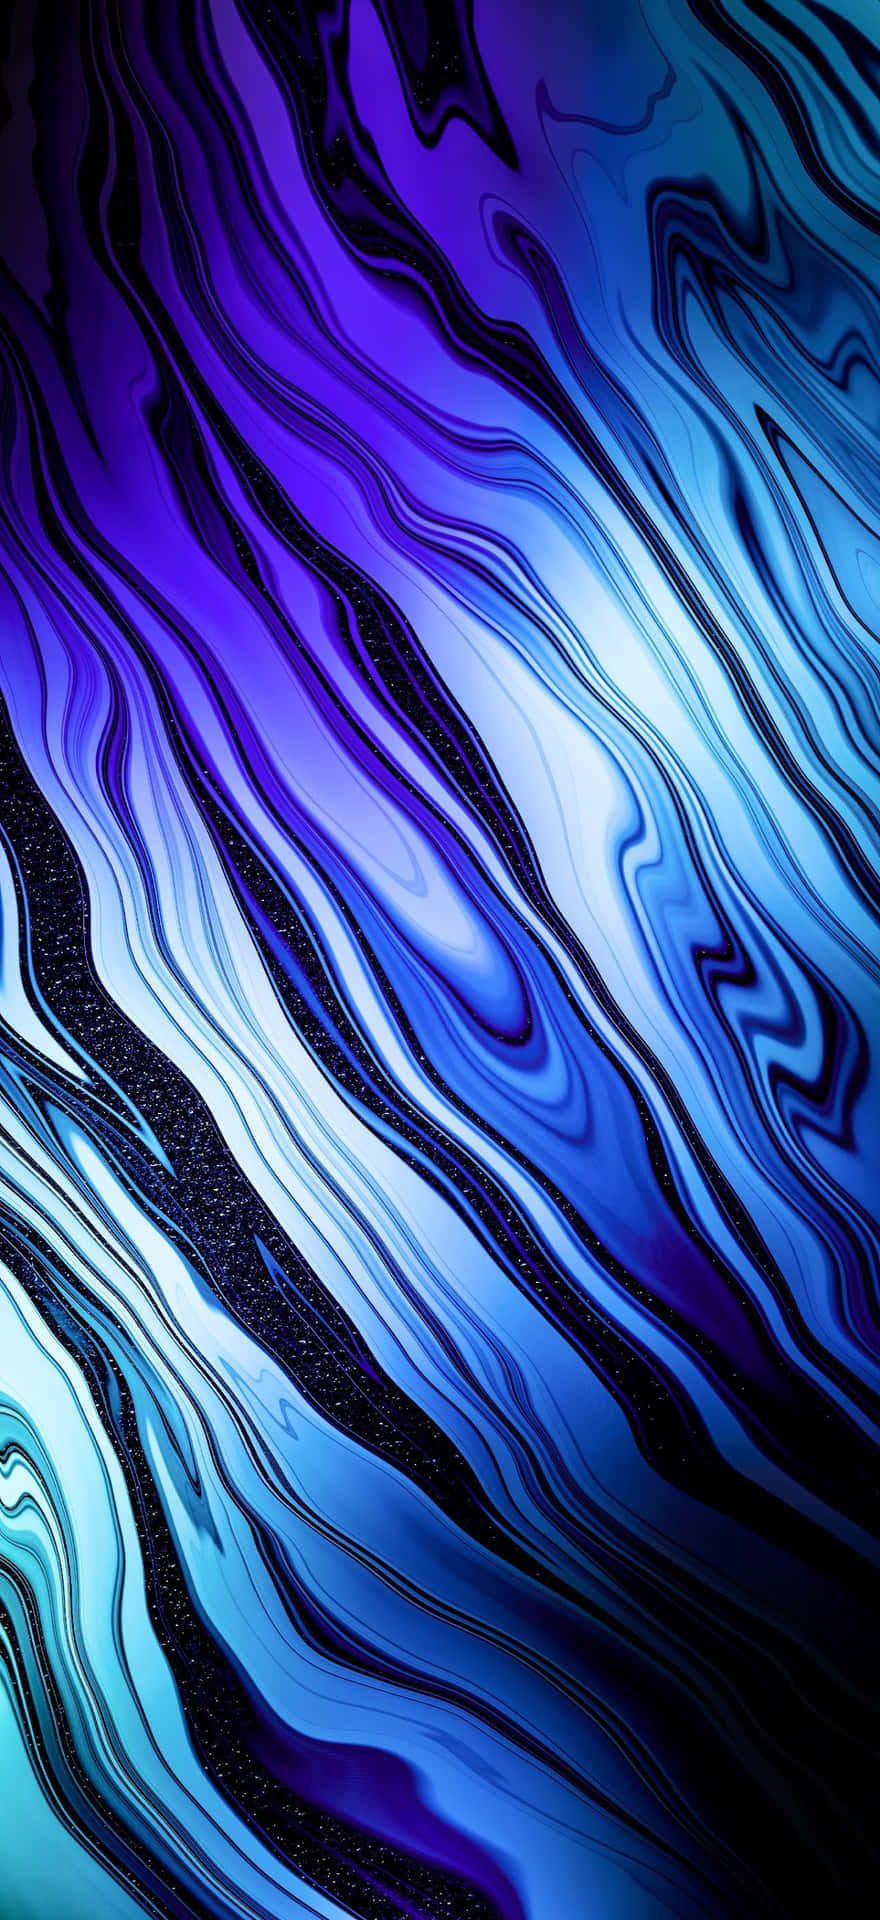 Aesthetic Blue Paint Swirl pictures